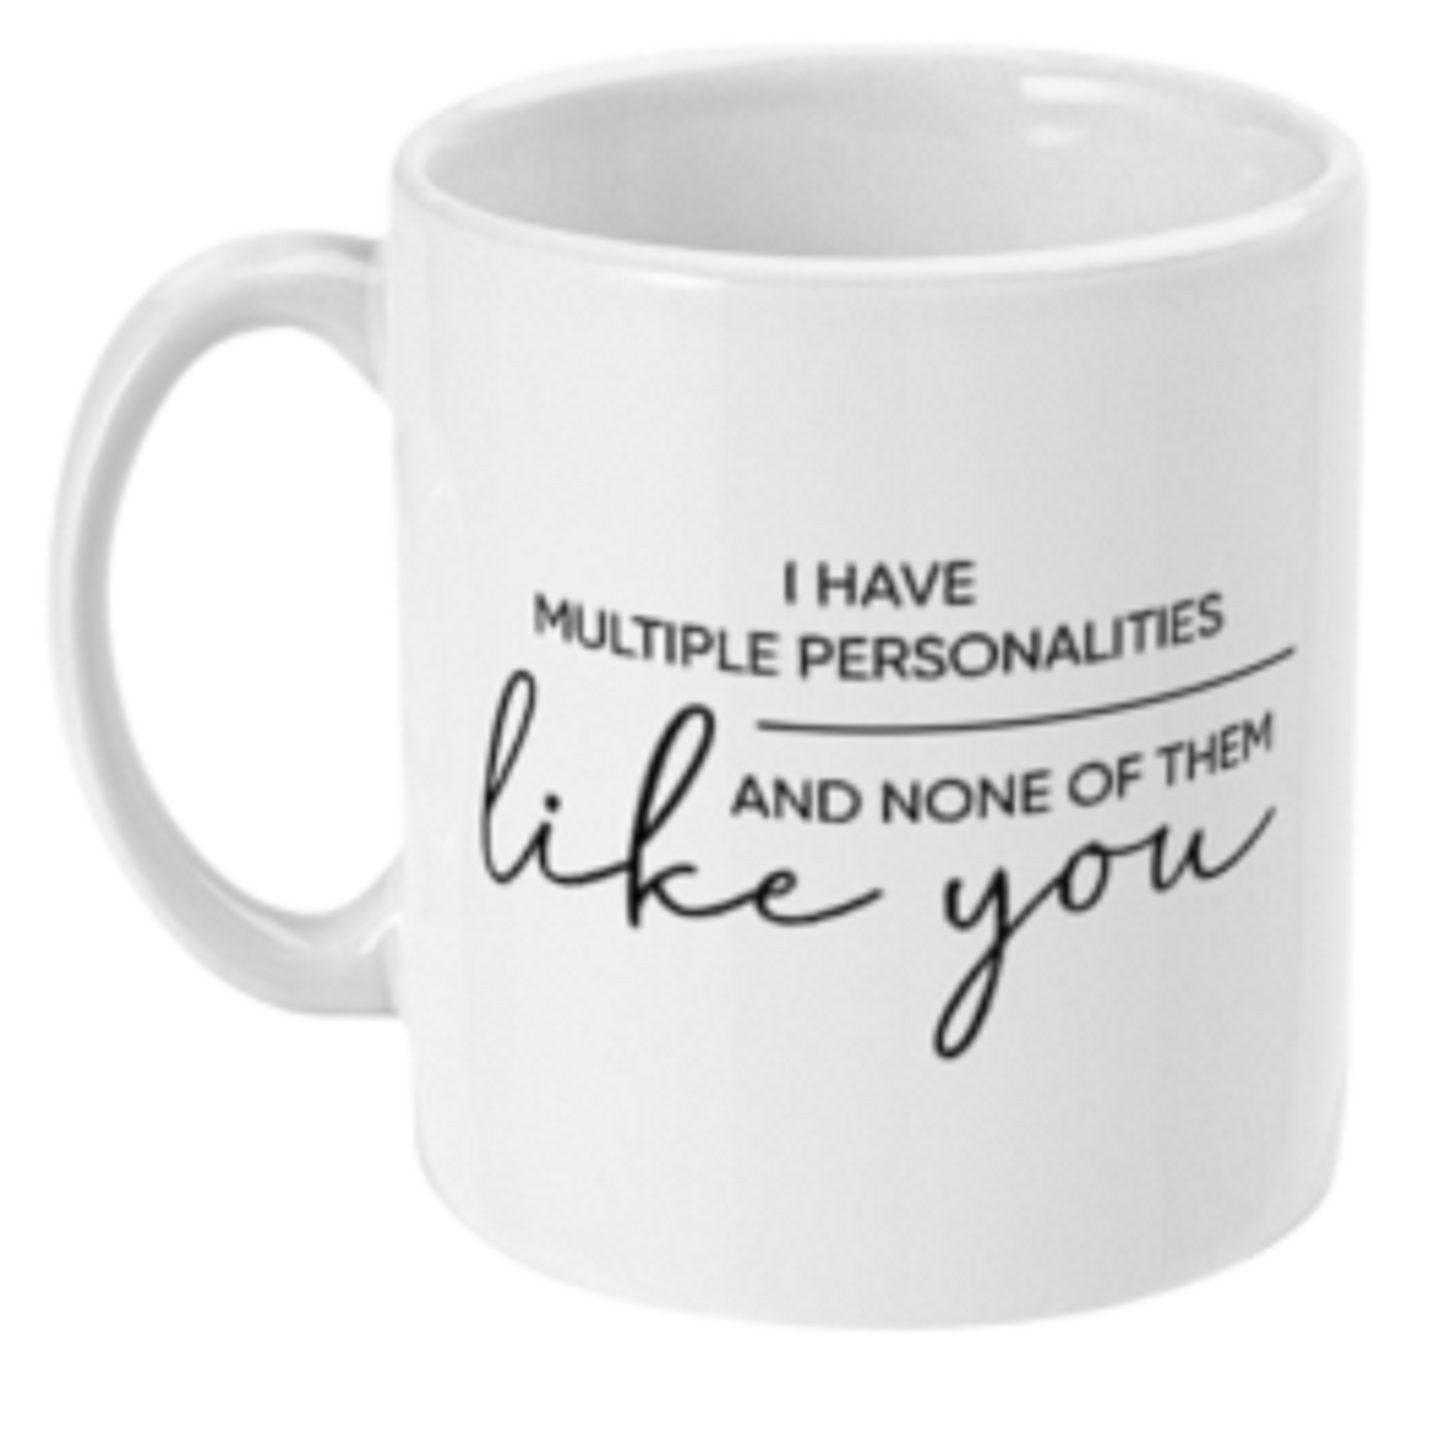  I have Multiple Personalities Funny Mug by Free Spirit Accessories sold by Free Spirit Accessories